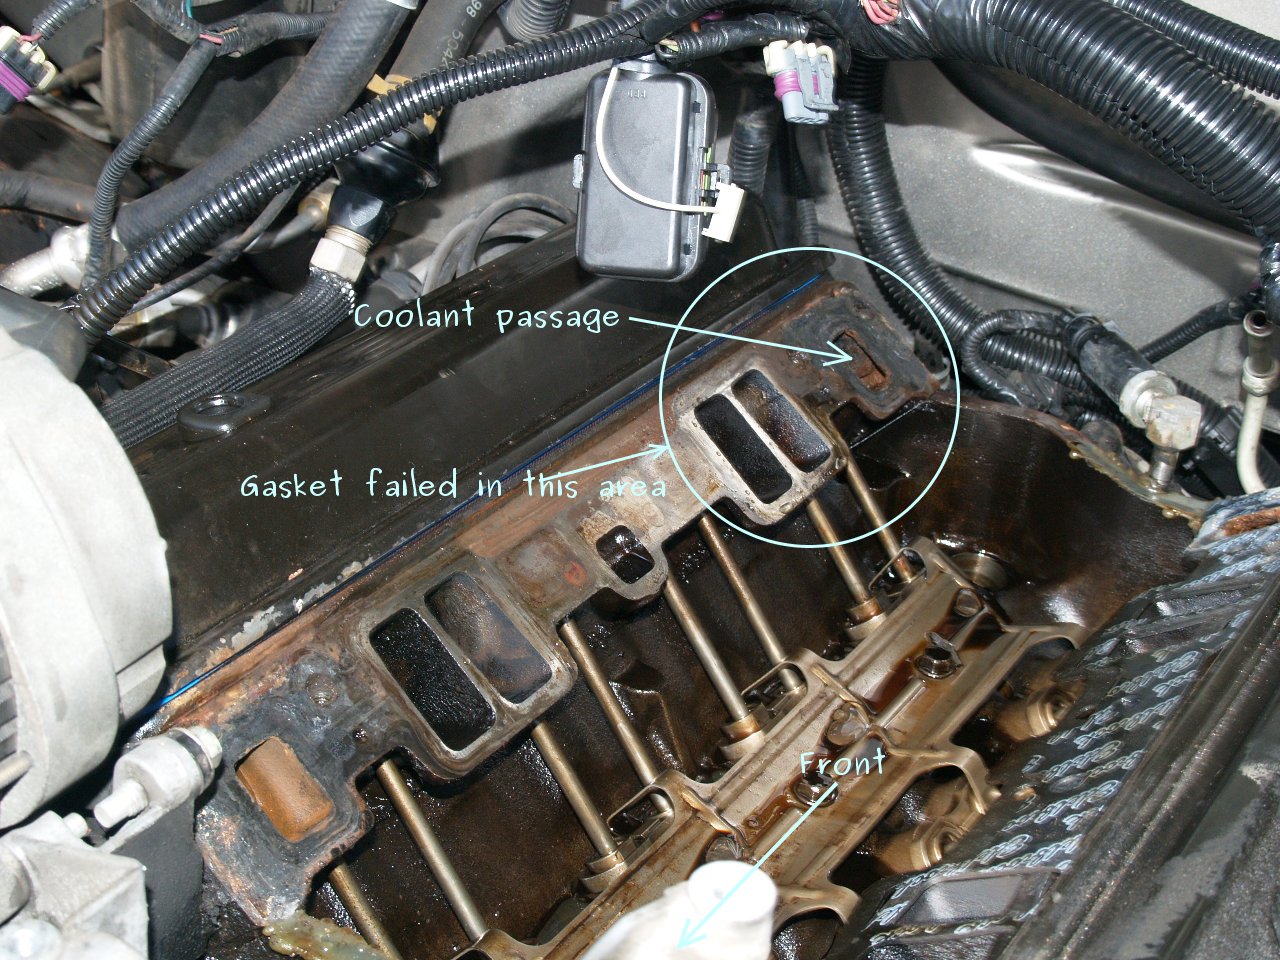 See P0693 in engine